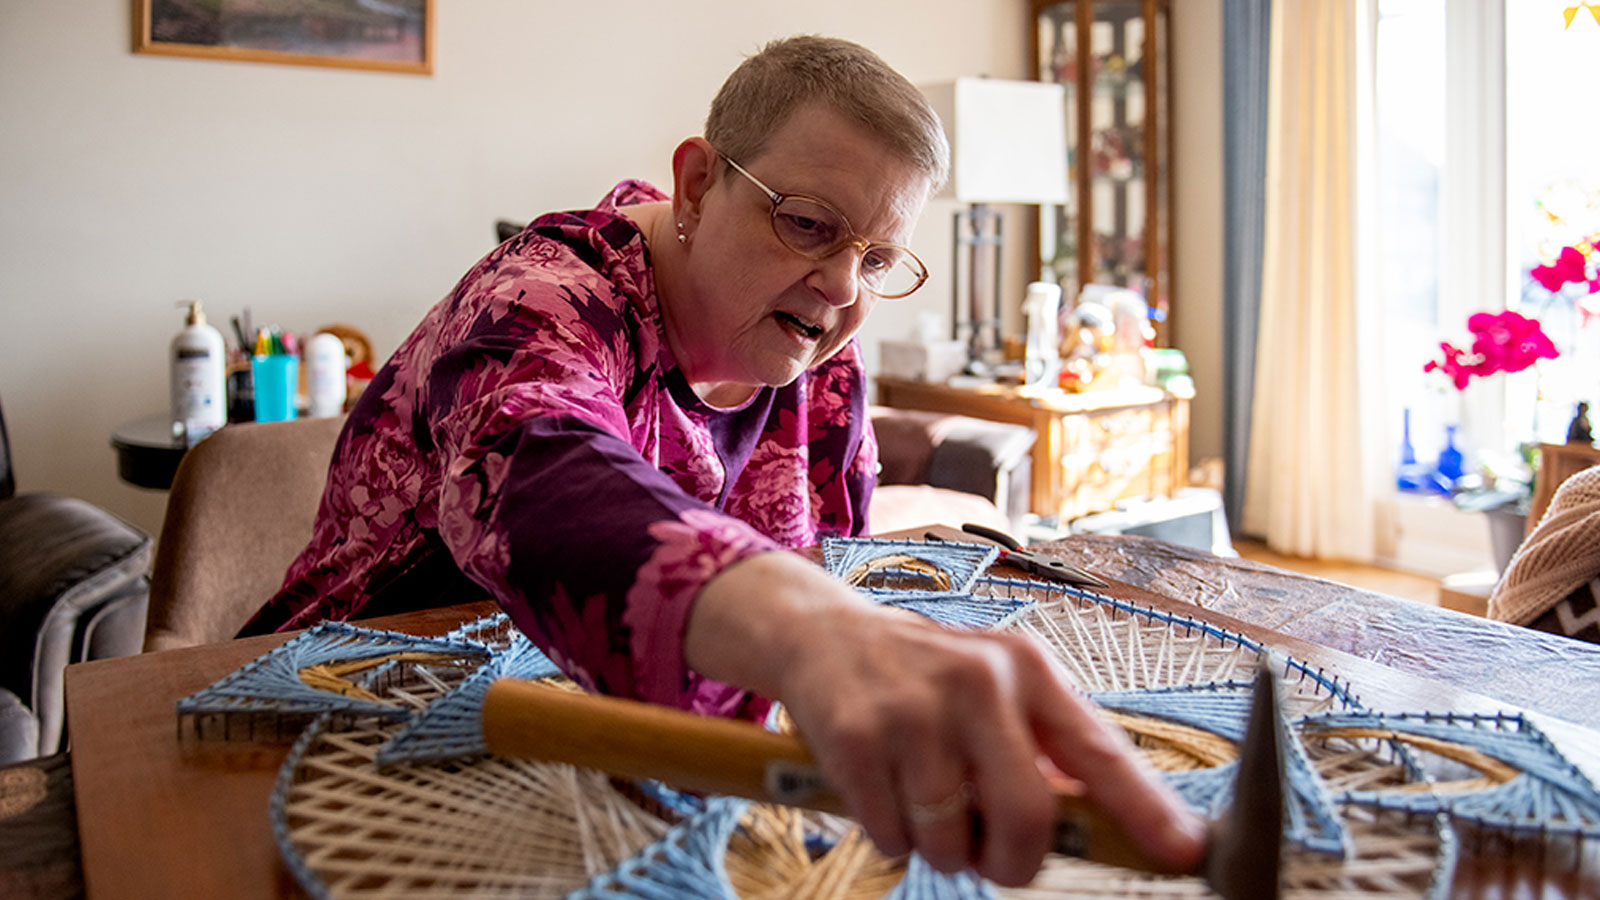 Kidney transplant patient working on a craft project at home